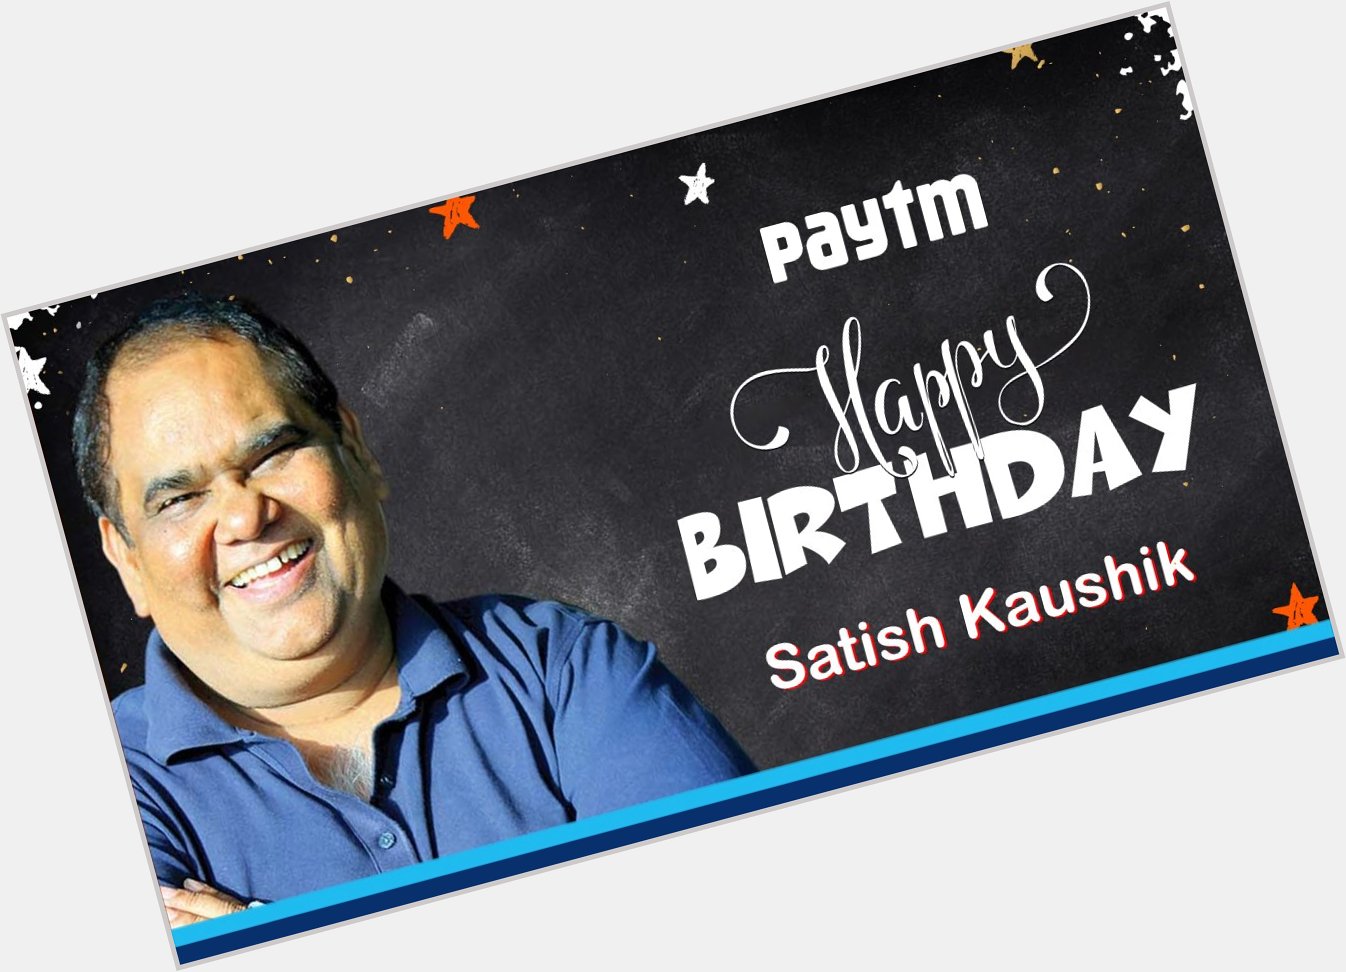 We wish a very happy birthday to Satish Kaushik! Thank you for over 30 years of outstanding entertainment 